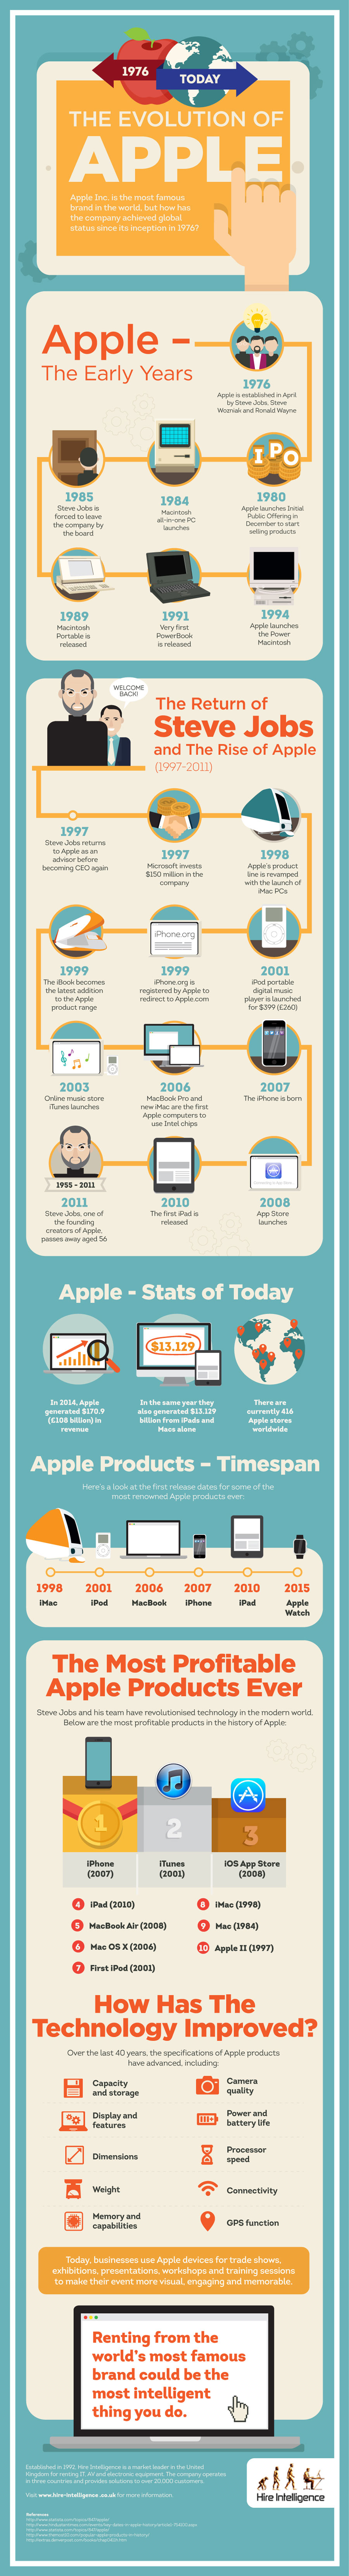 [INFOGRAPHIC] The Evolution of Apple